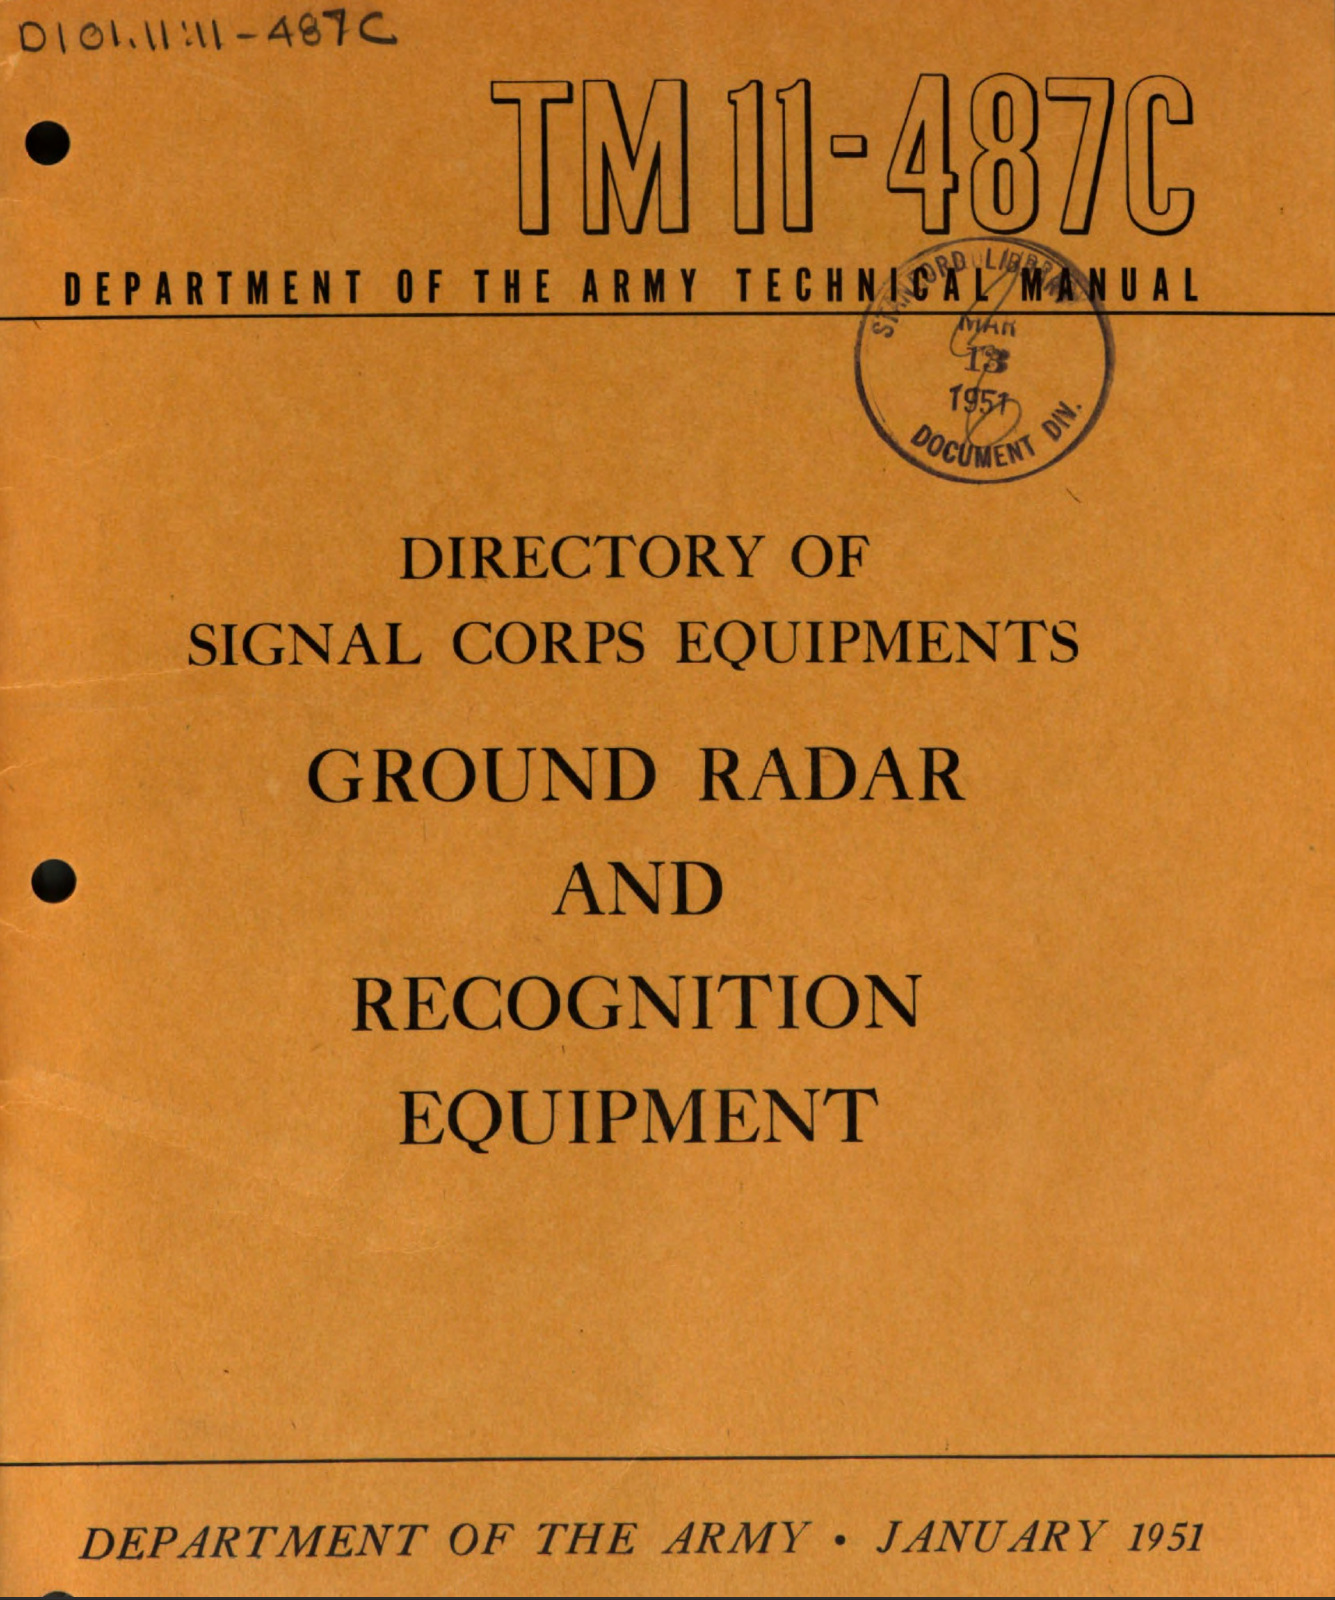 38 Page TM 11-487C GROUND RADAR RECOGNITION EQUIPMENT SCR-584 Manual on Data CD